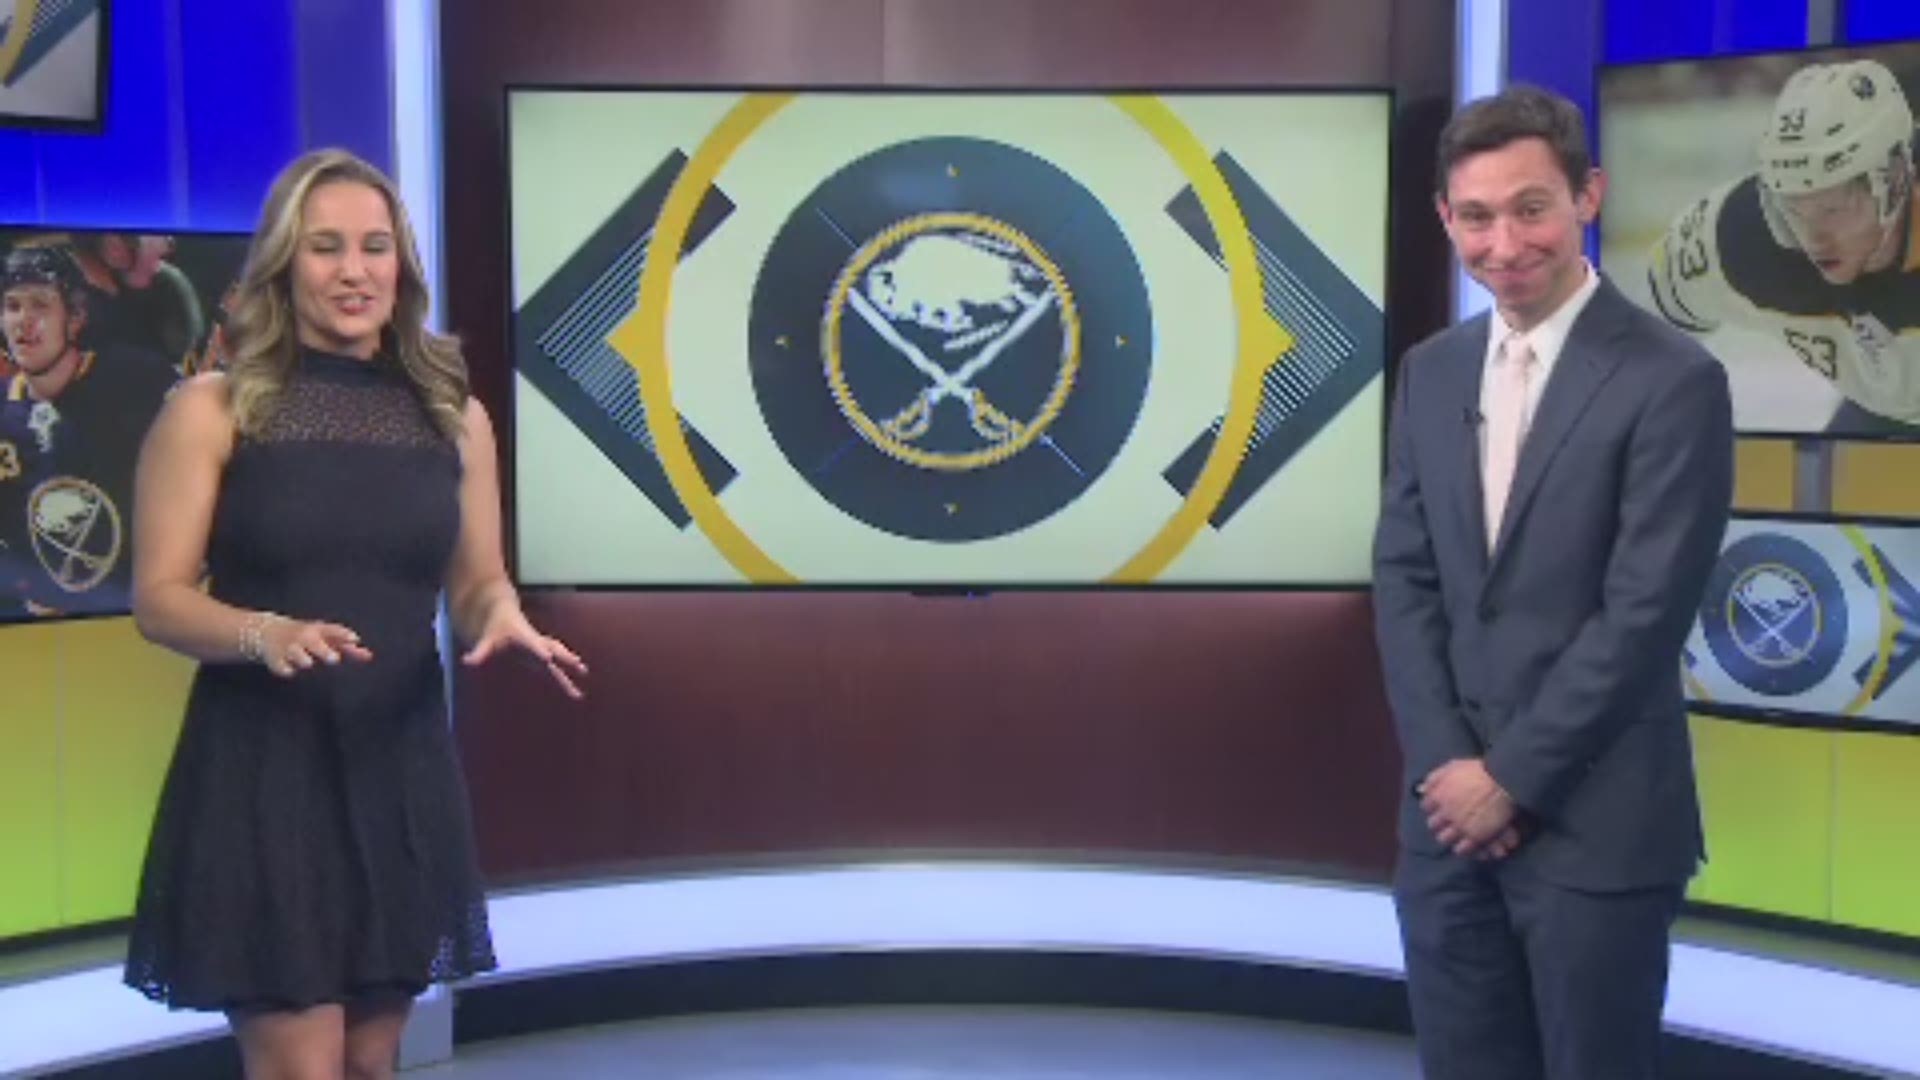 Friday night, the Sabres signed Jeff Skinner to an 8-year, 72 million dollar contract extension. 2 on Your Side's Heather Prusak and Buffalo News Sabres beat reporter, Lance Lysowski break down the deal plus look ahead to what's next for the team.